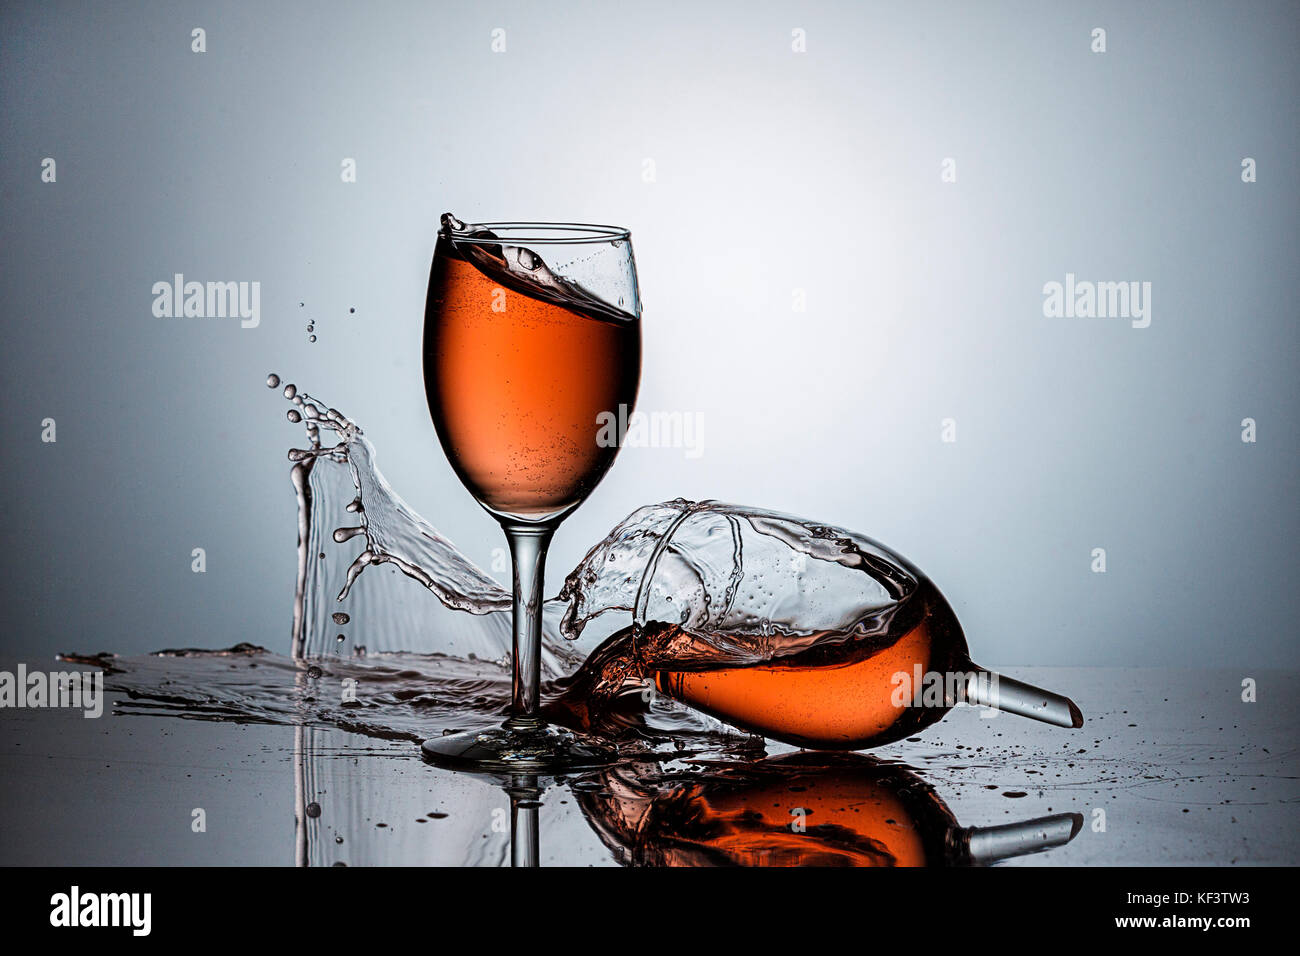 A broken wine glass spills wine after being dropped. Stock Photo